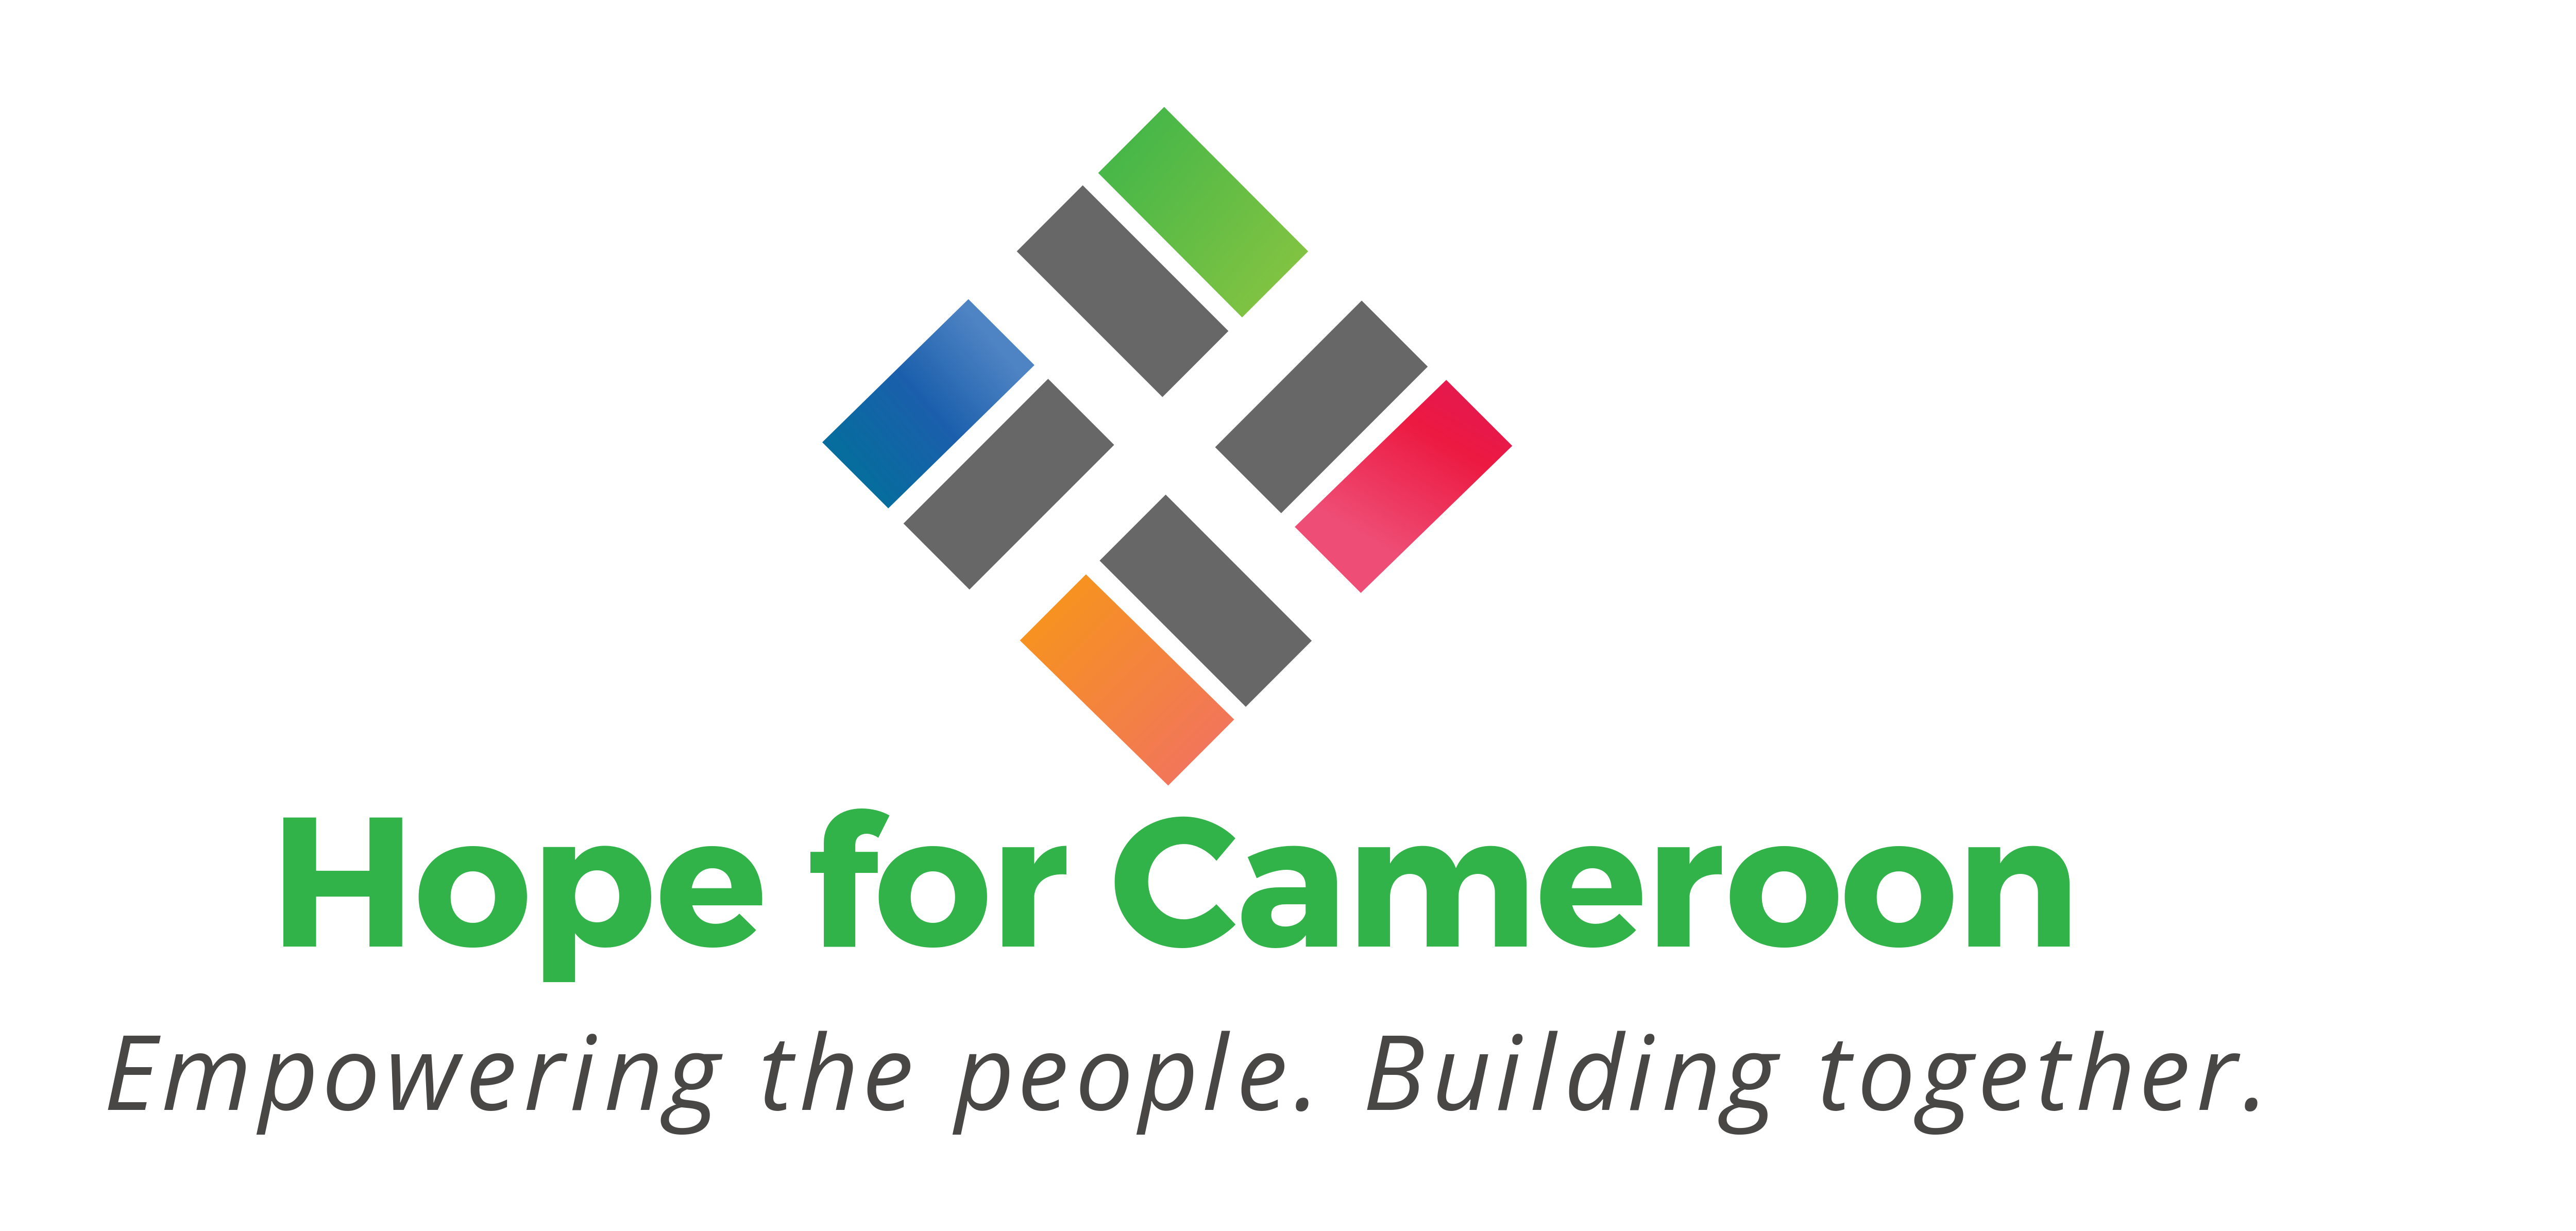 Hope for Cameroon